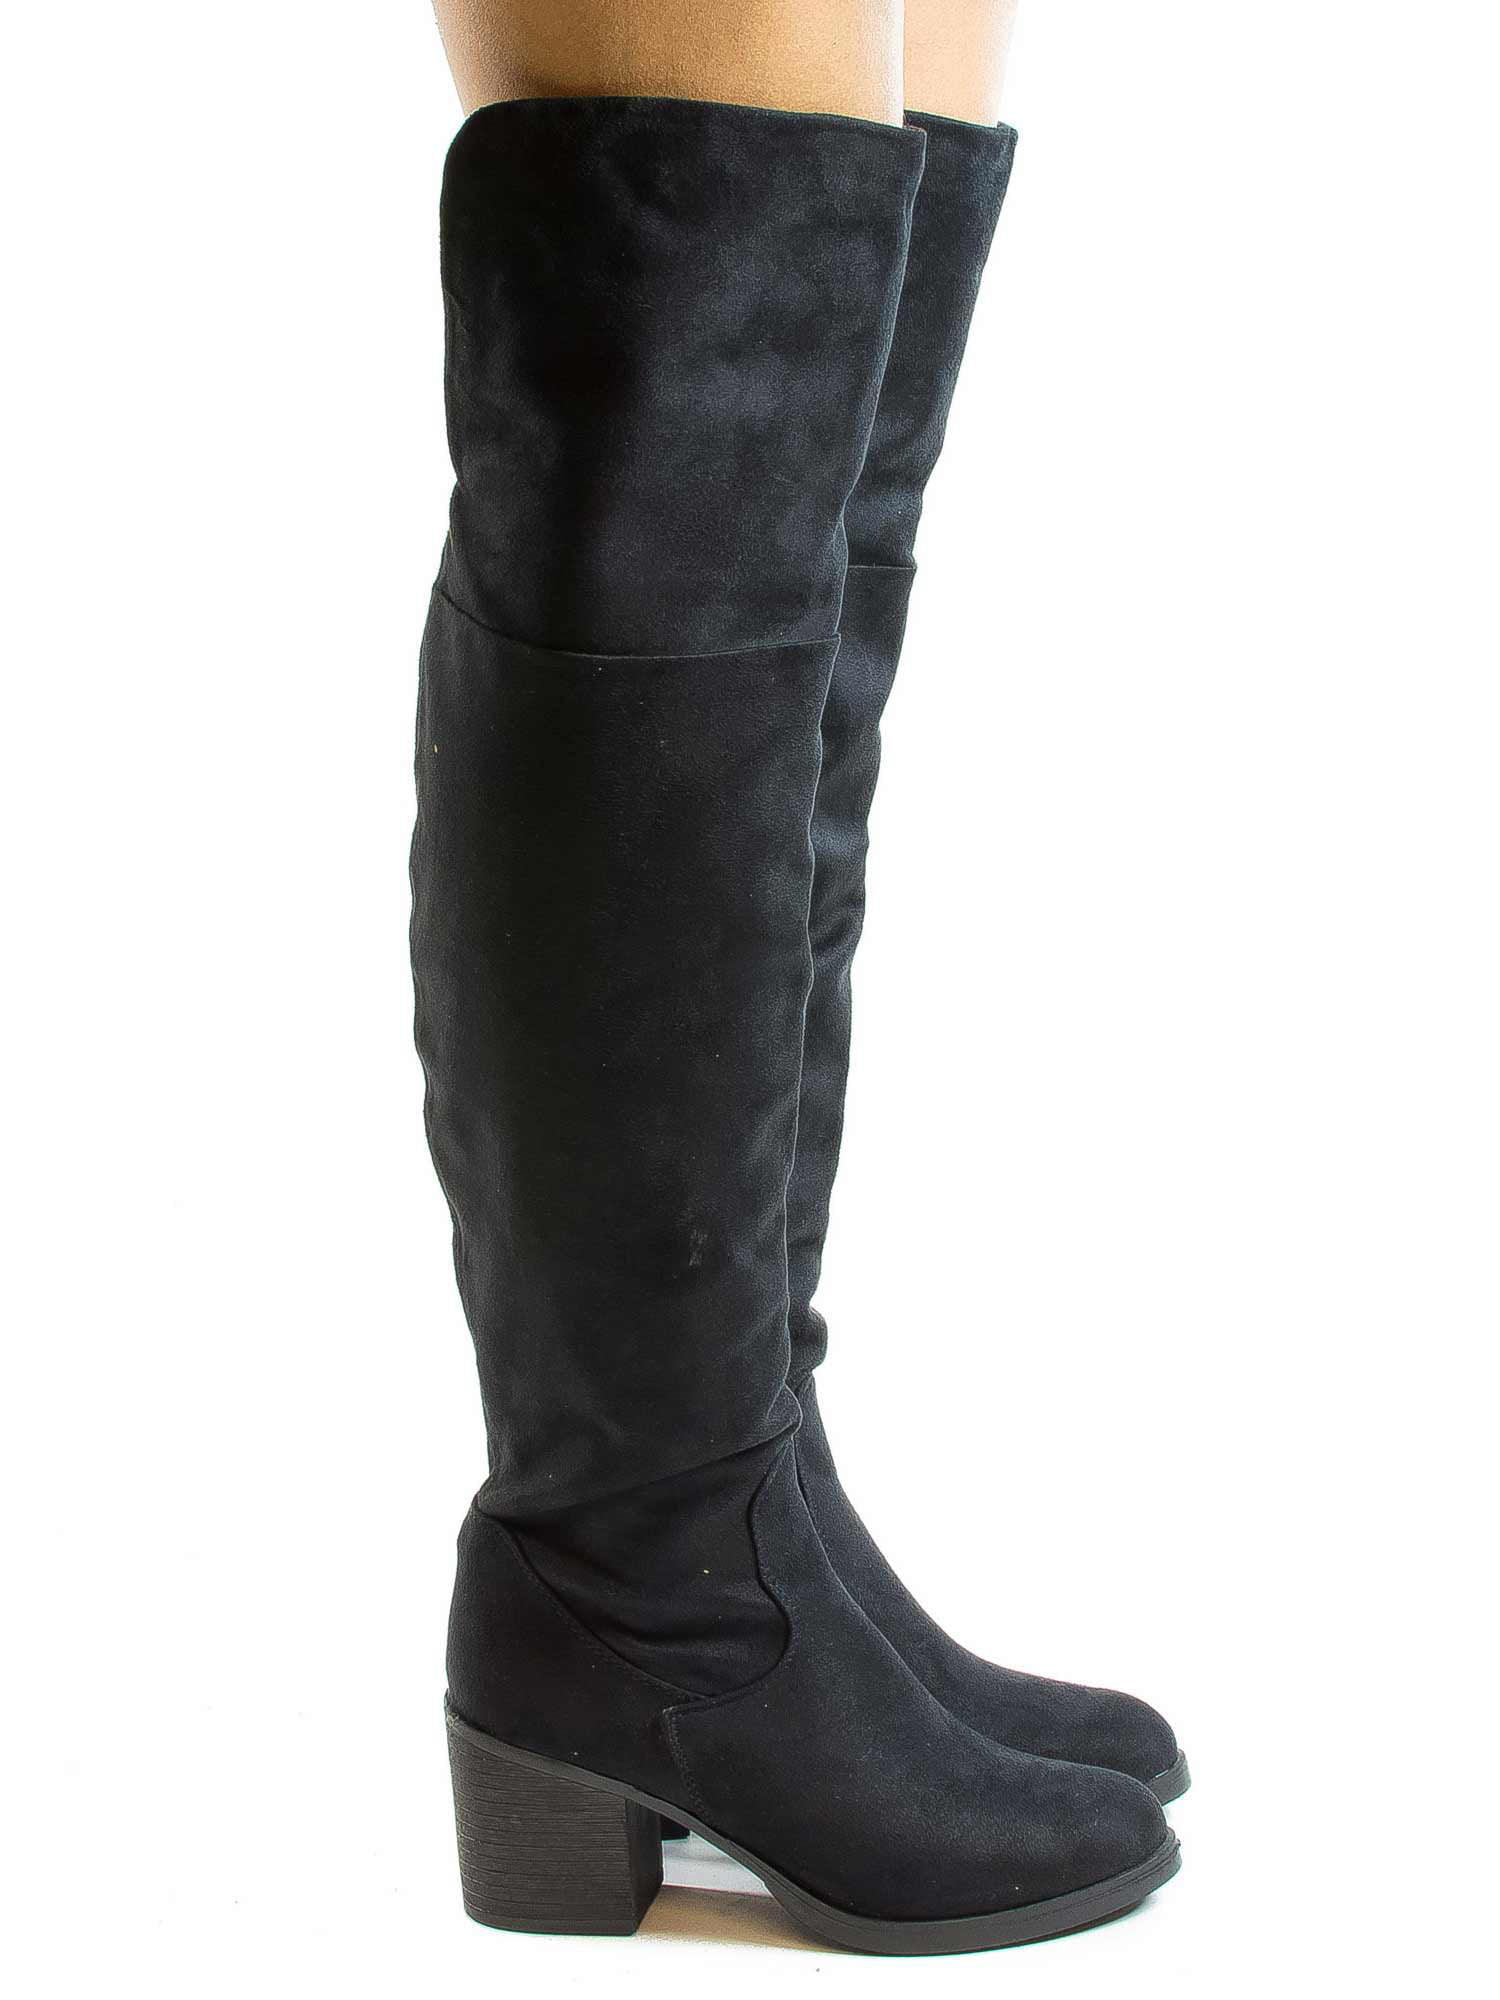 Bamboo - Victoria01 by Bamboo, Foldable Over Knee Dress Boots w Faux ...